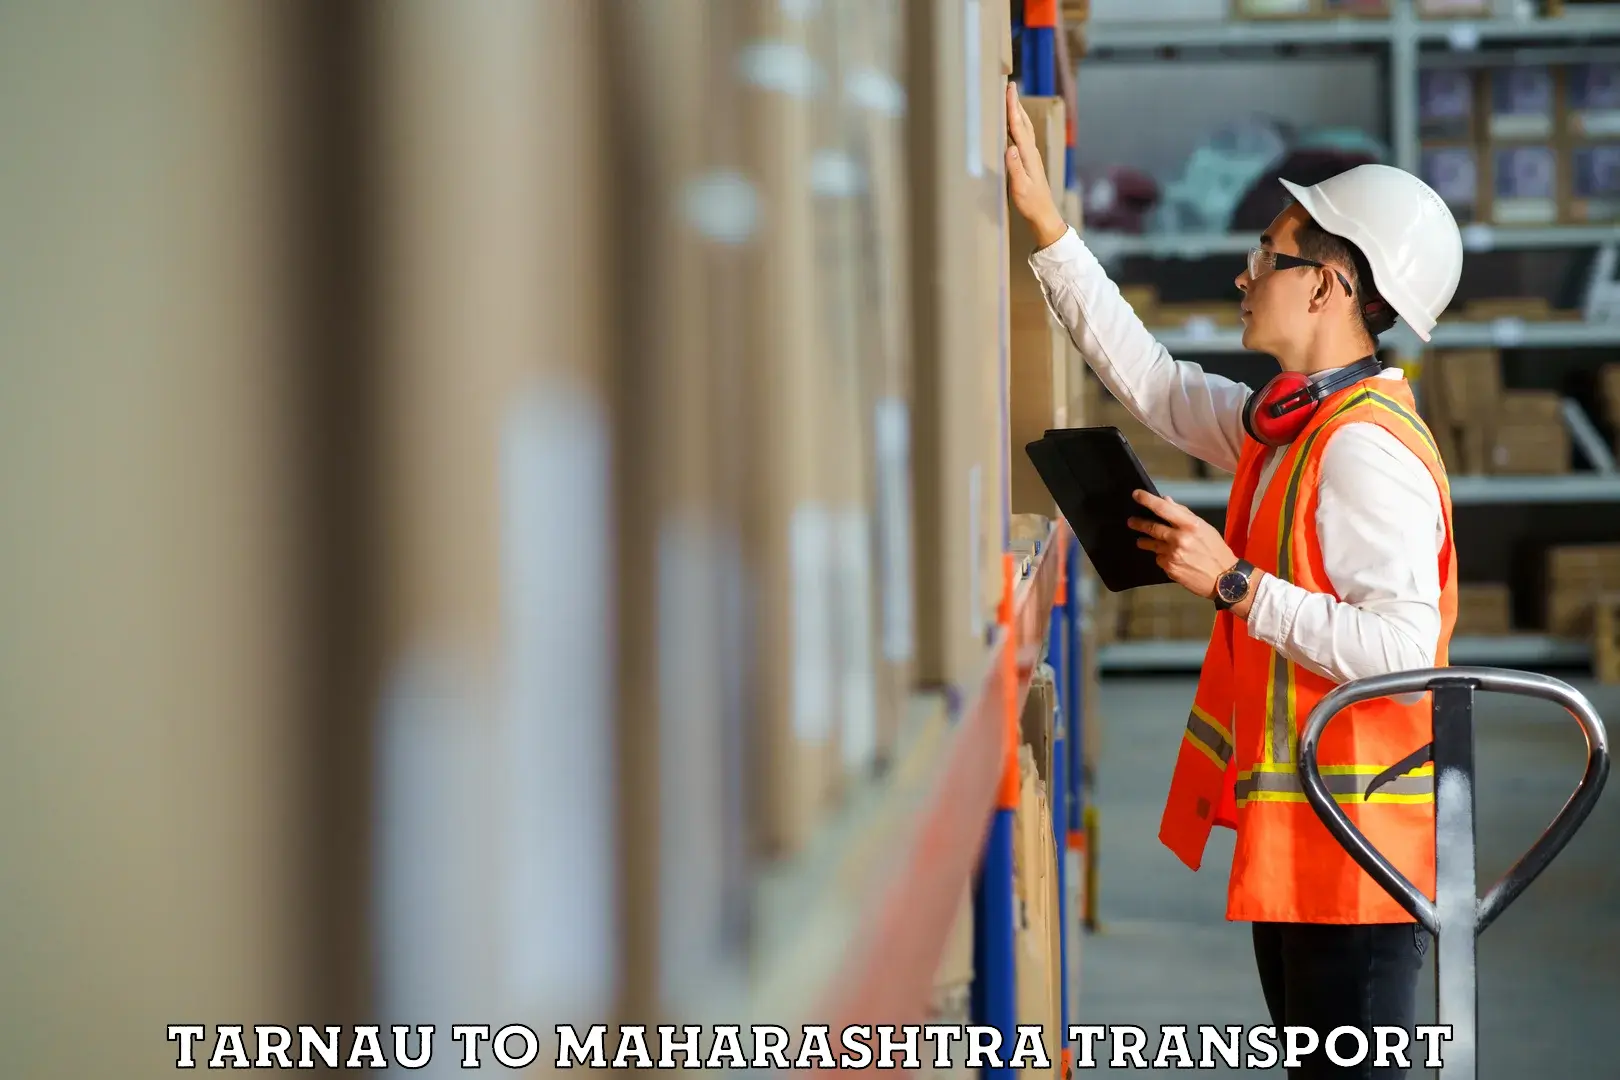 Container transportation services Tarnau to Pune